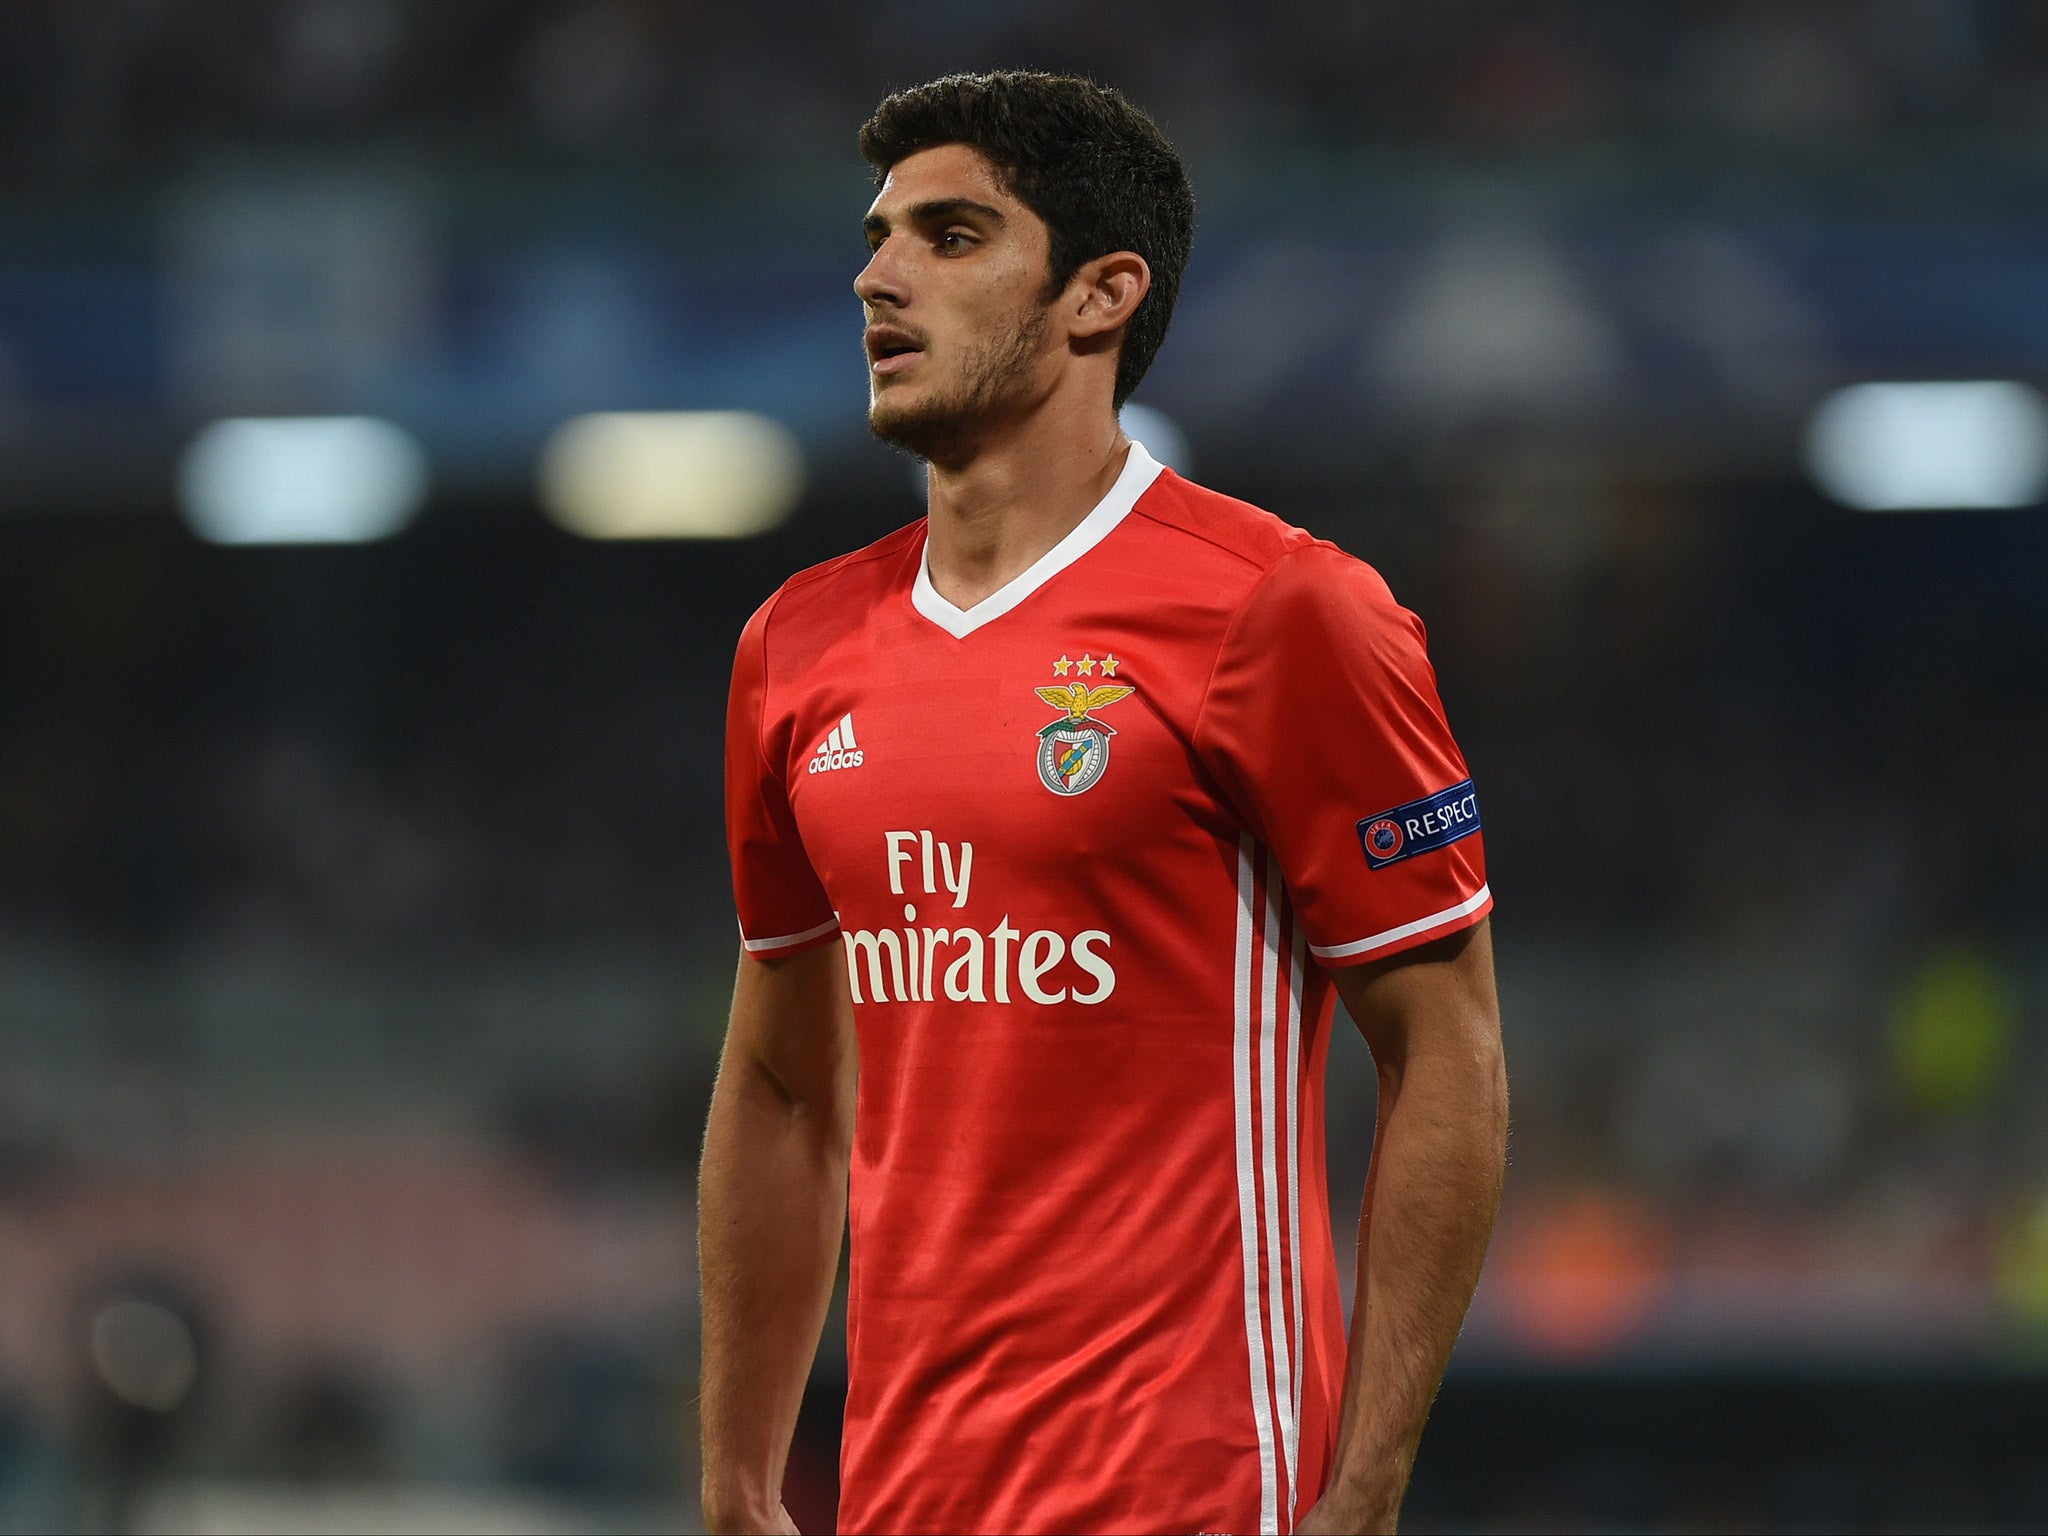 Goncalo Guedes is attracting reported interest from both Arsenal and Manchester United